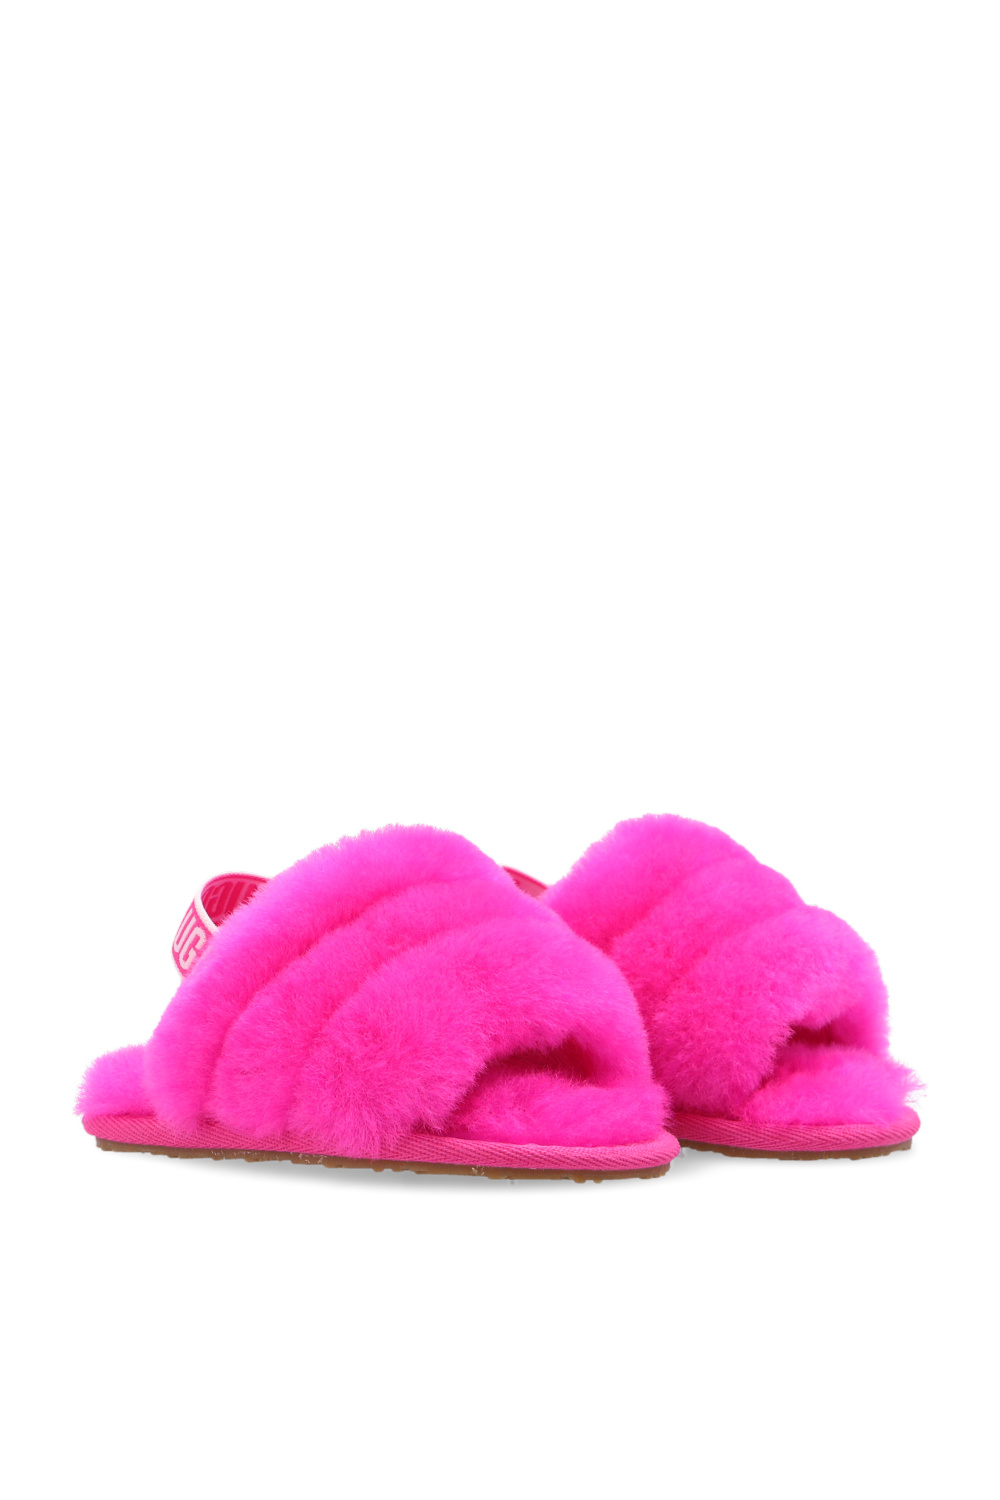 UGG Kids ‘Fluff Yeah’ low-top shoes and blanket set